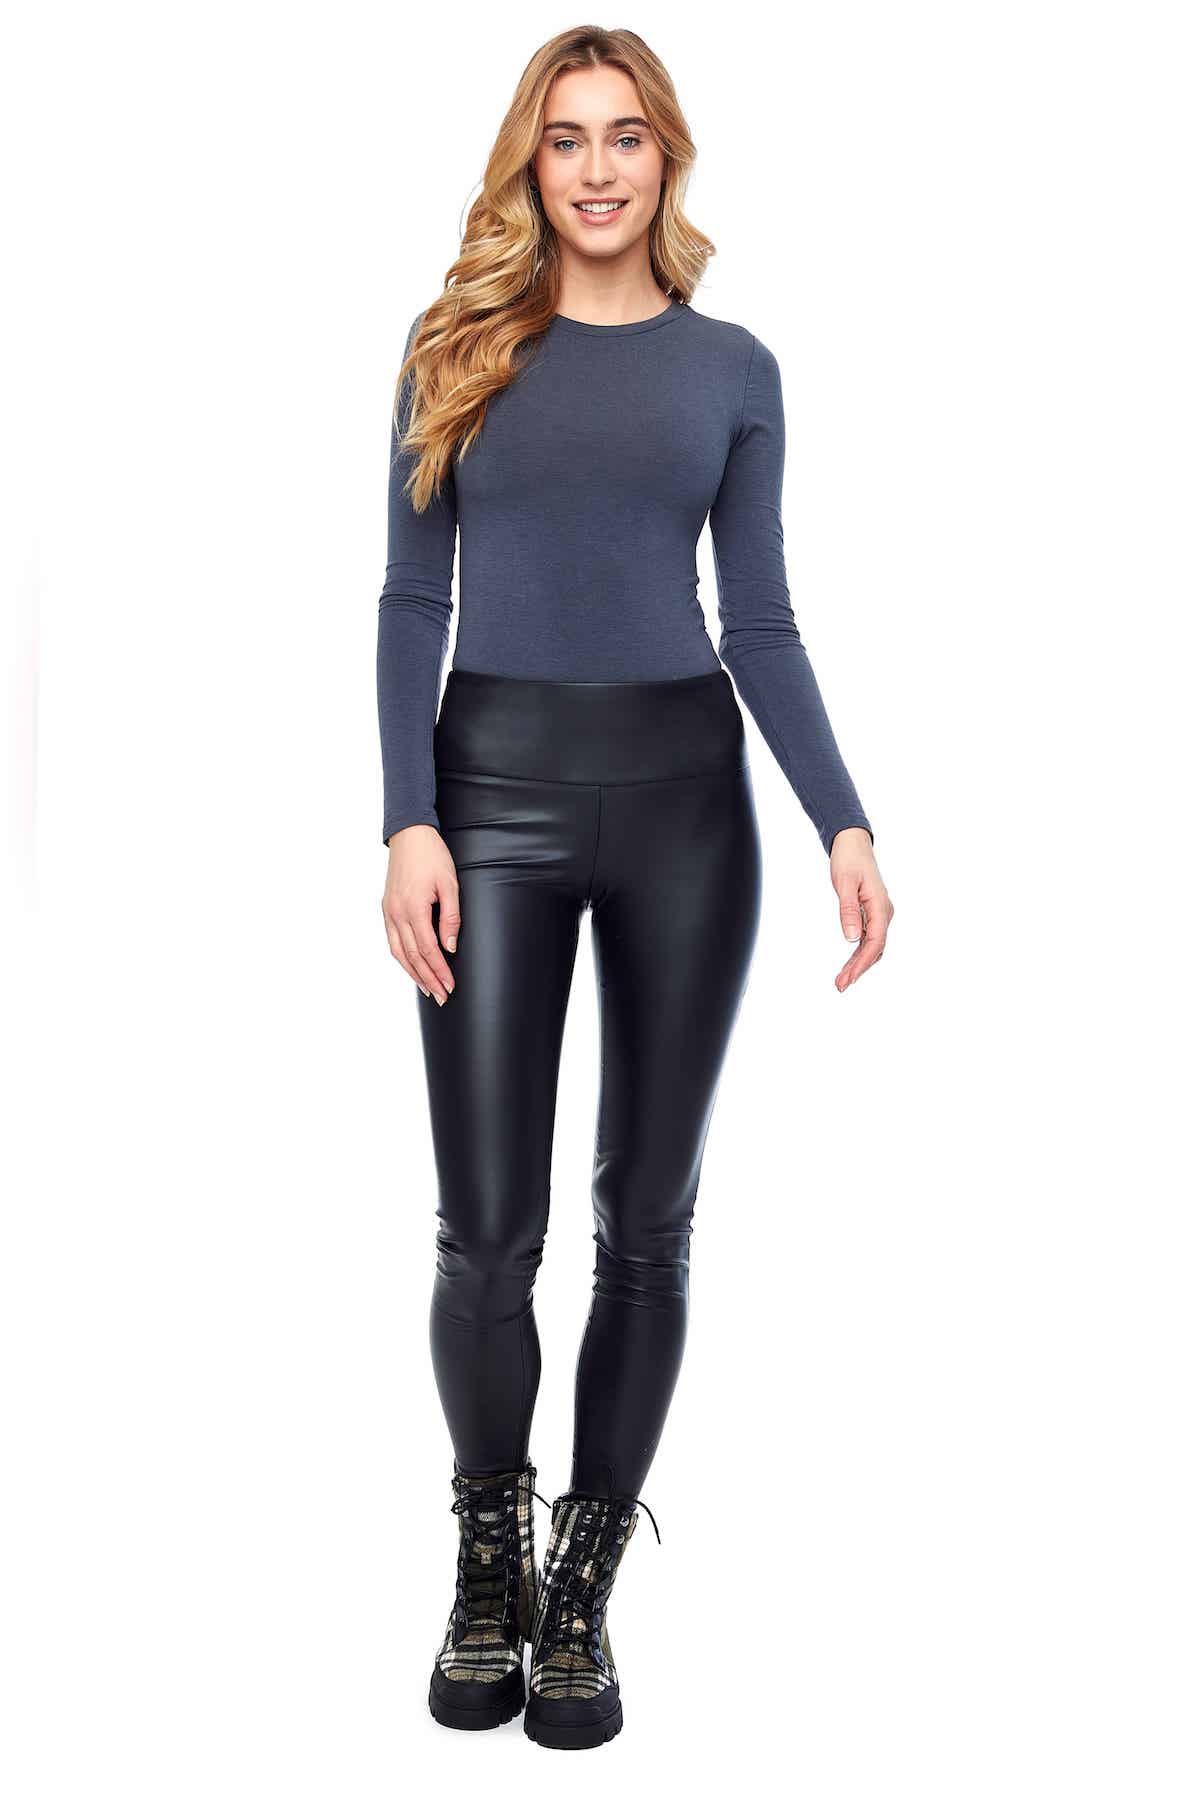 Lysse Black High Waisted Leggings with Faux Leather Side Panel Size M Pull  on C6 | eBay